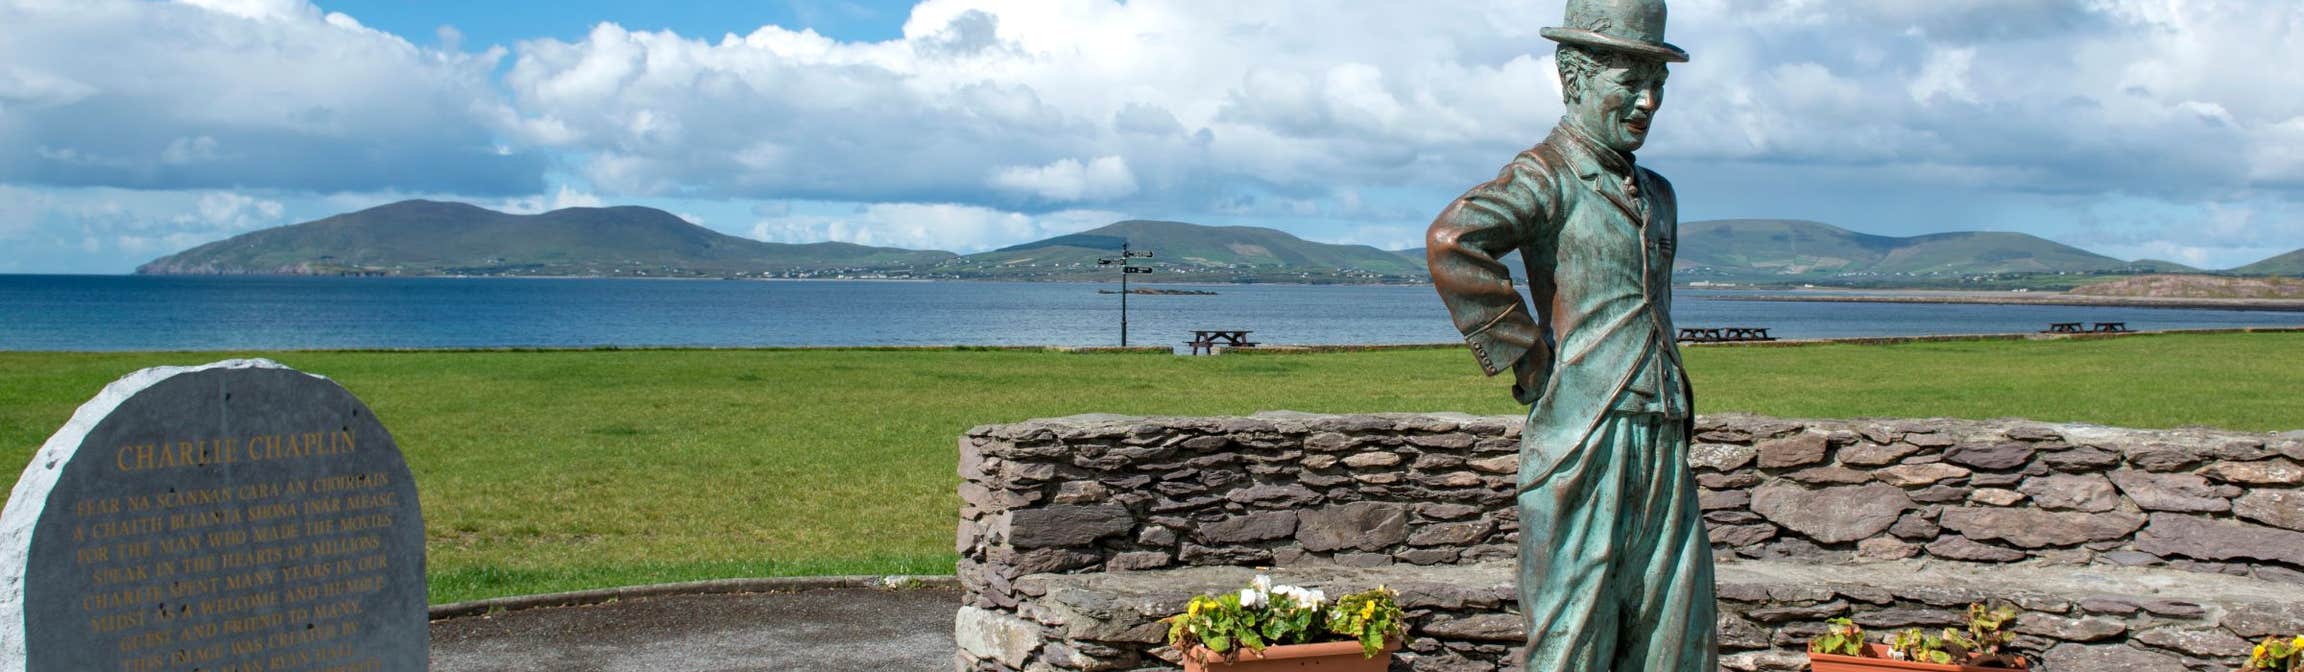 Image of the Charlie Chaplin statue in Waterville in County Kerry